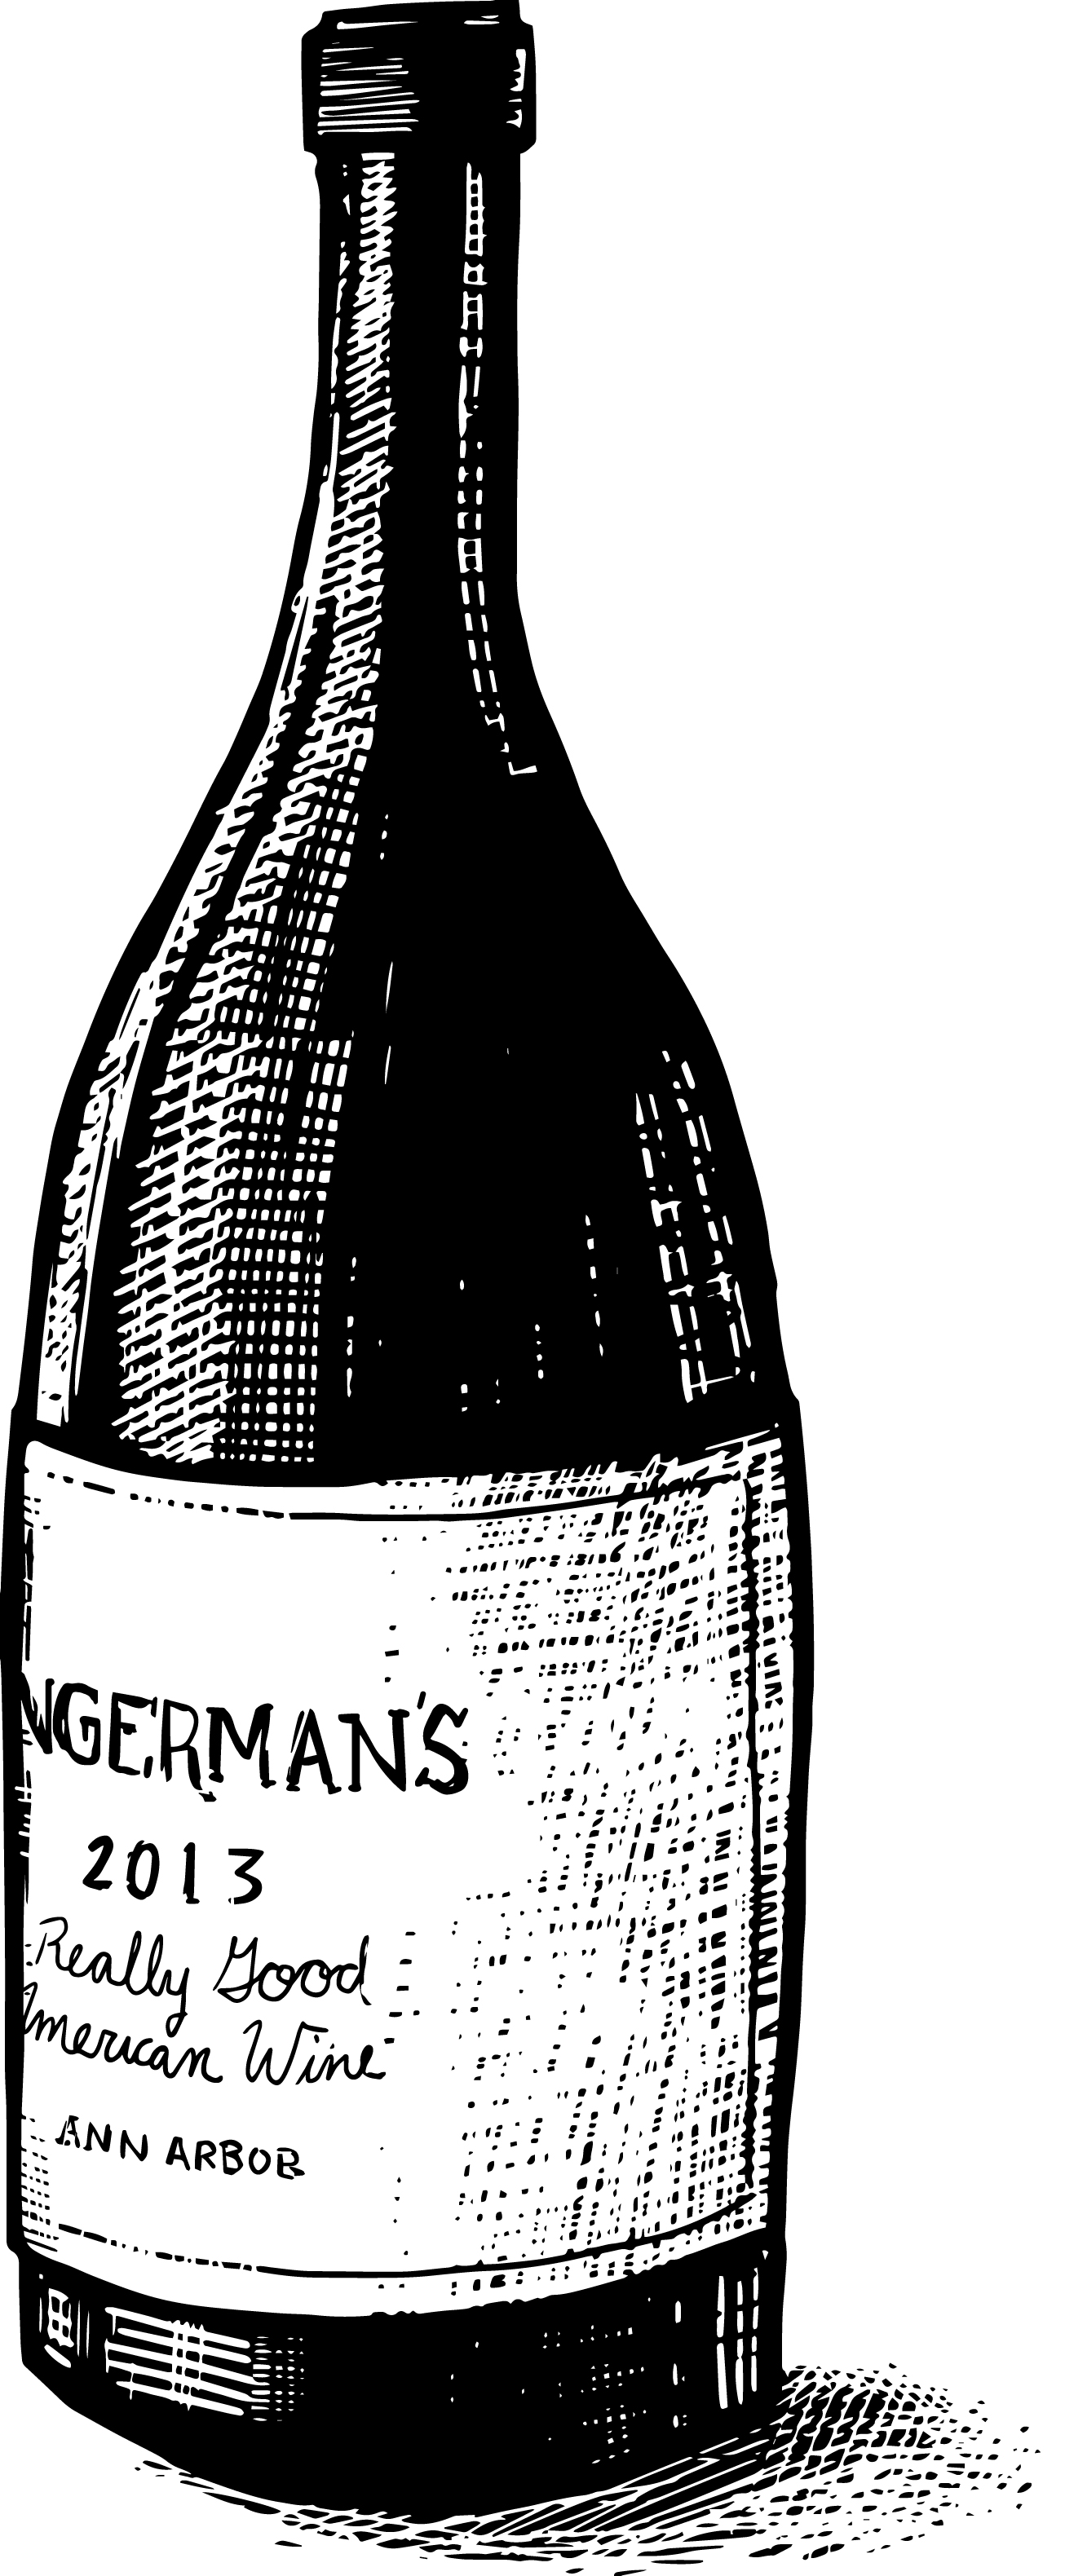 Illustration of a wine bottle with a label that reads: Zingerman's Really Good American Wine, Ann Arbor.